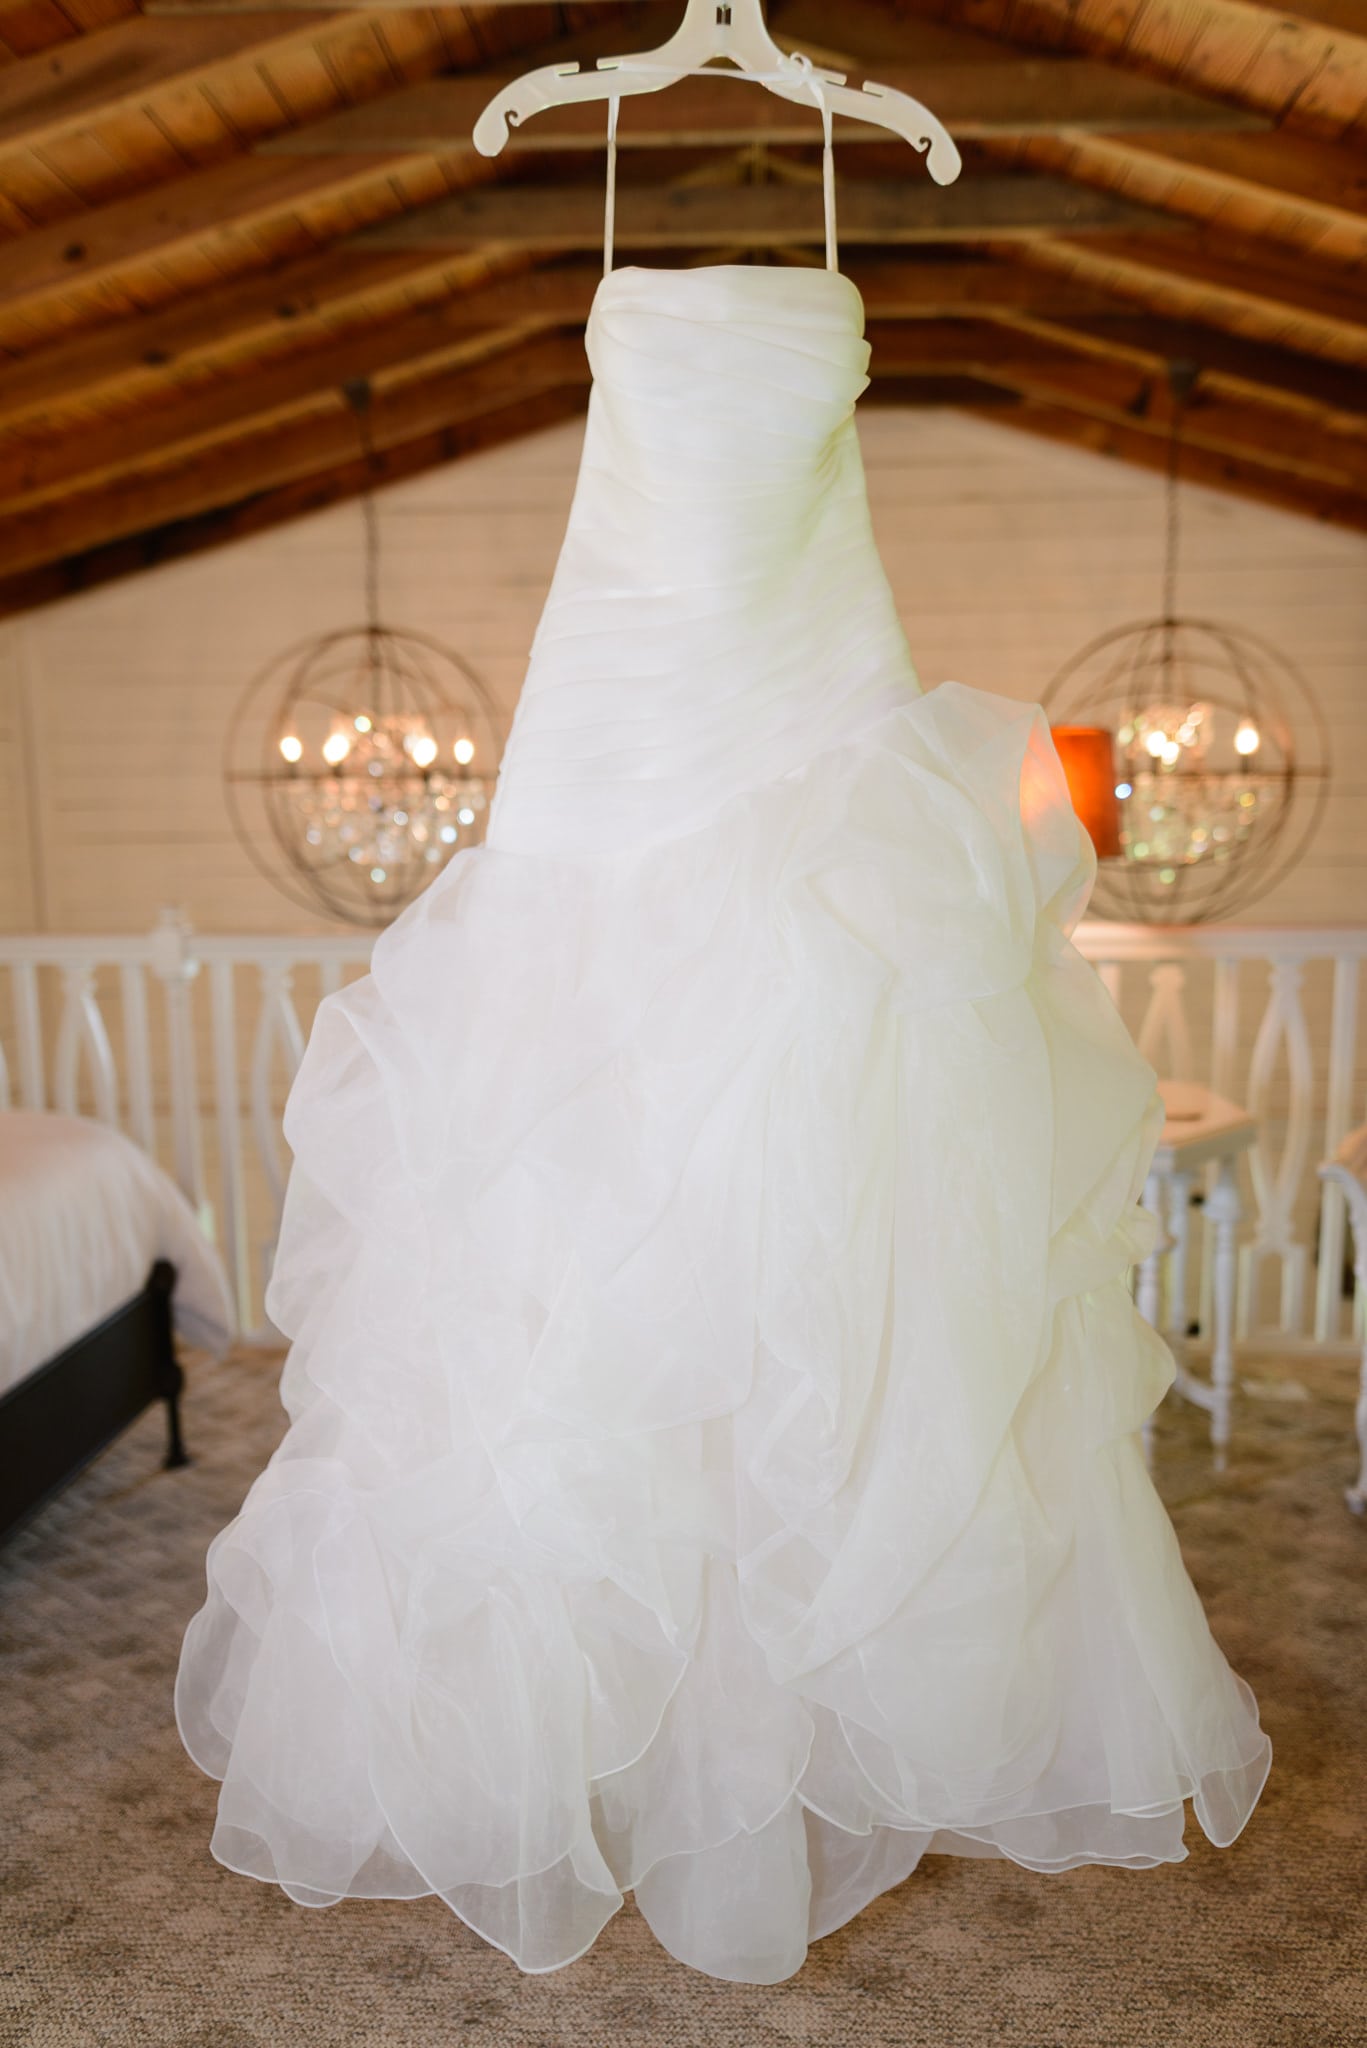 Bride's dress hanging from rafters in cottage - Wildberry Farm